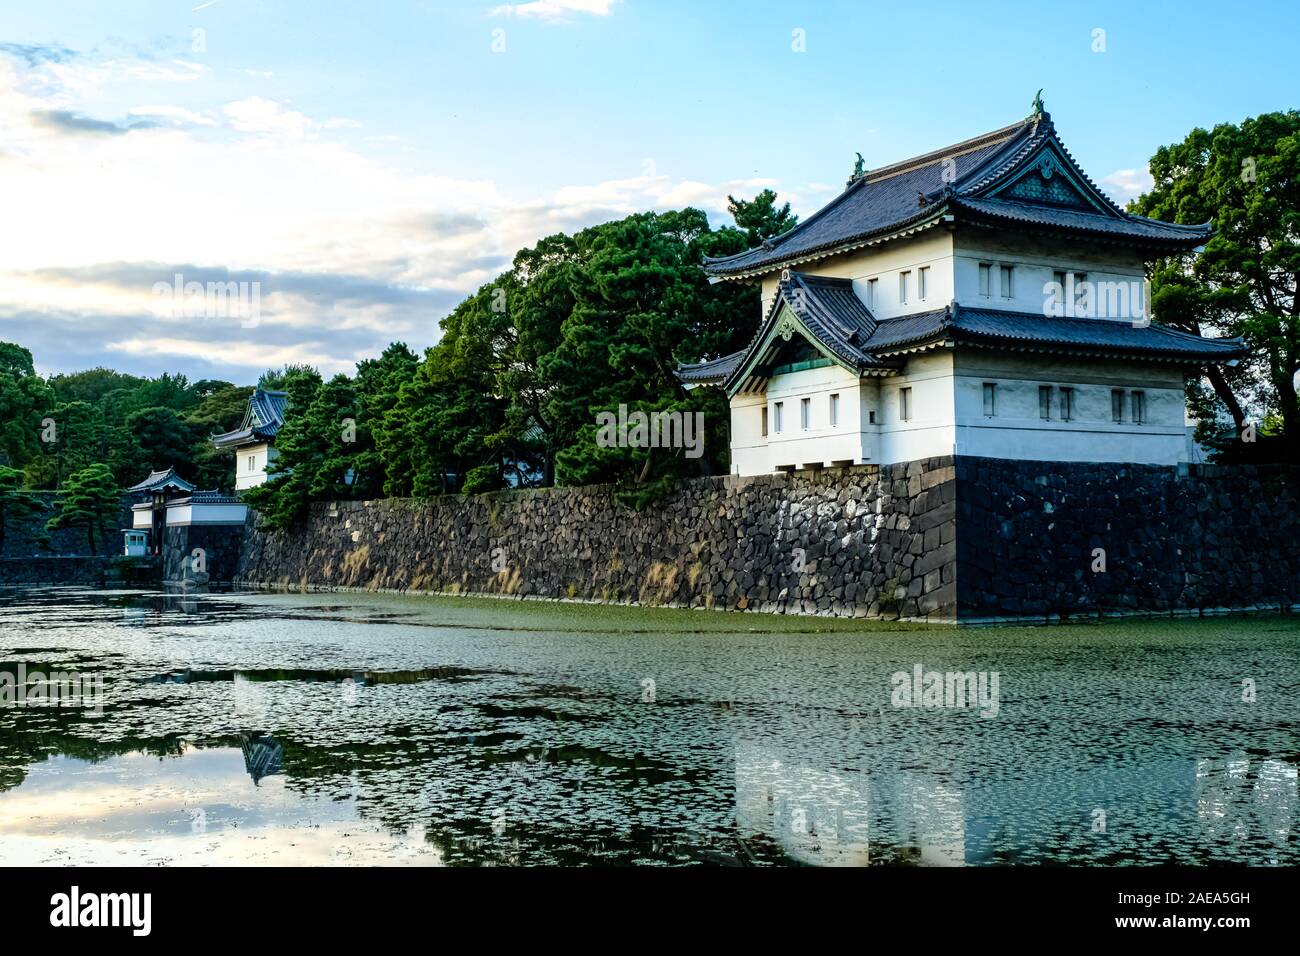 Japanese Castle Over the Moat Stock Photo